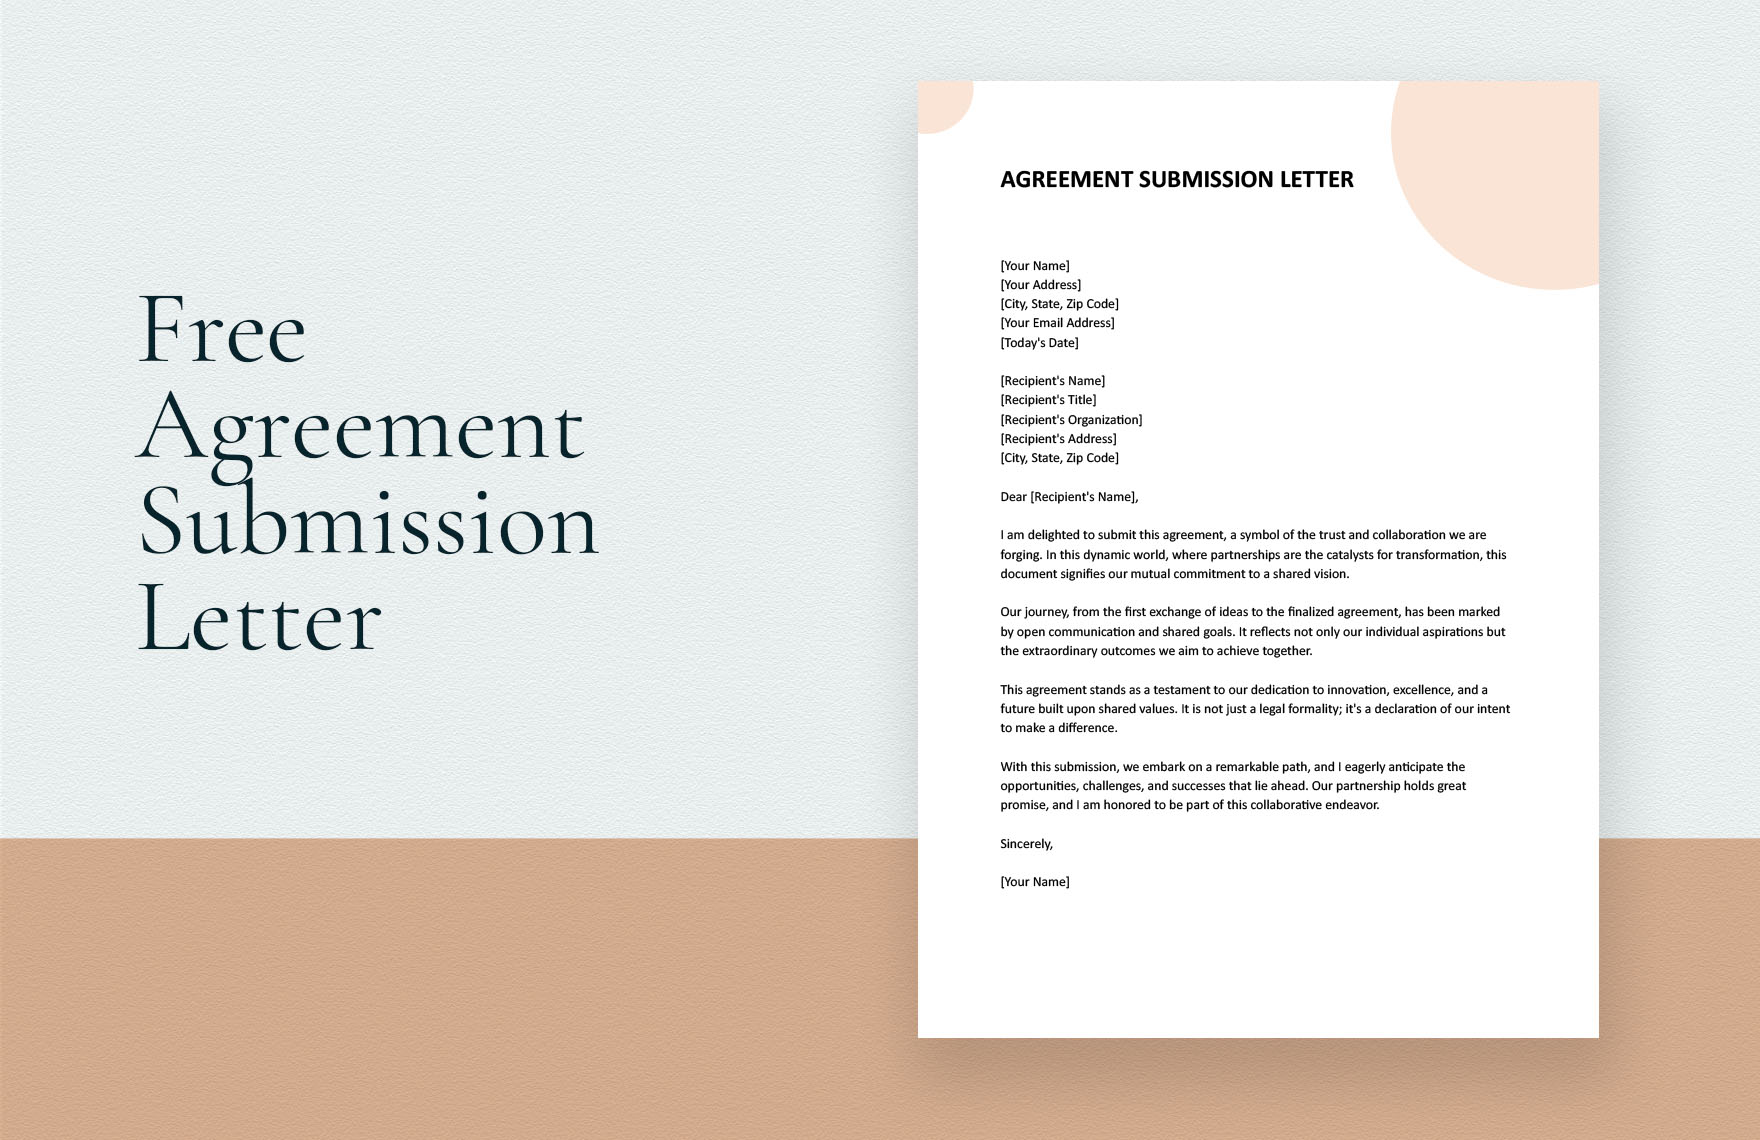 Agreement Submission Letter